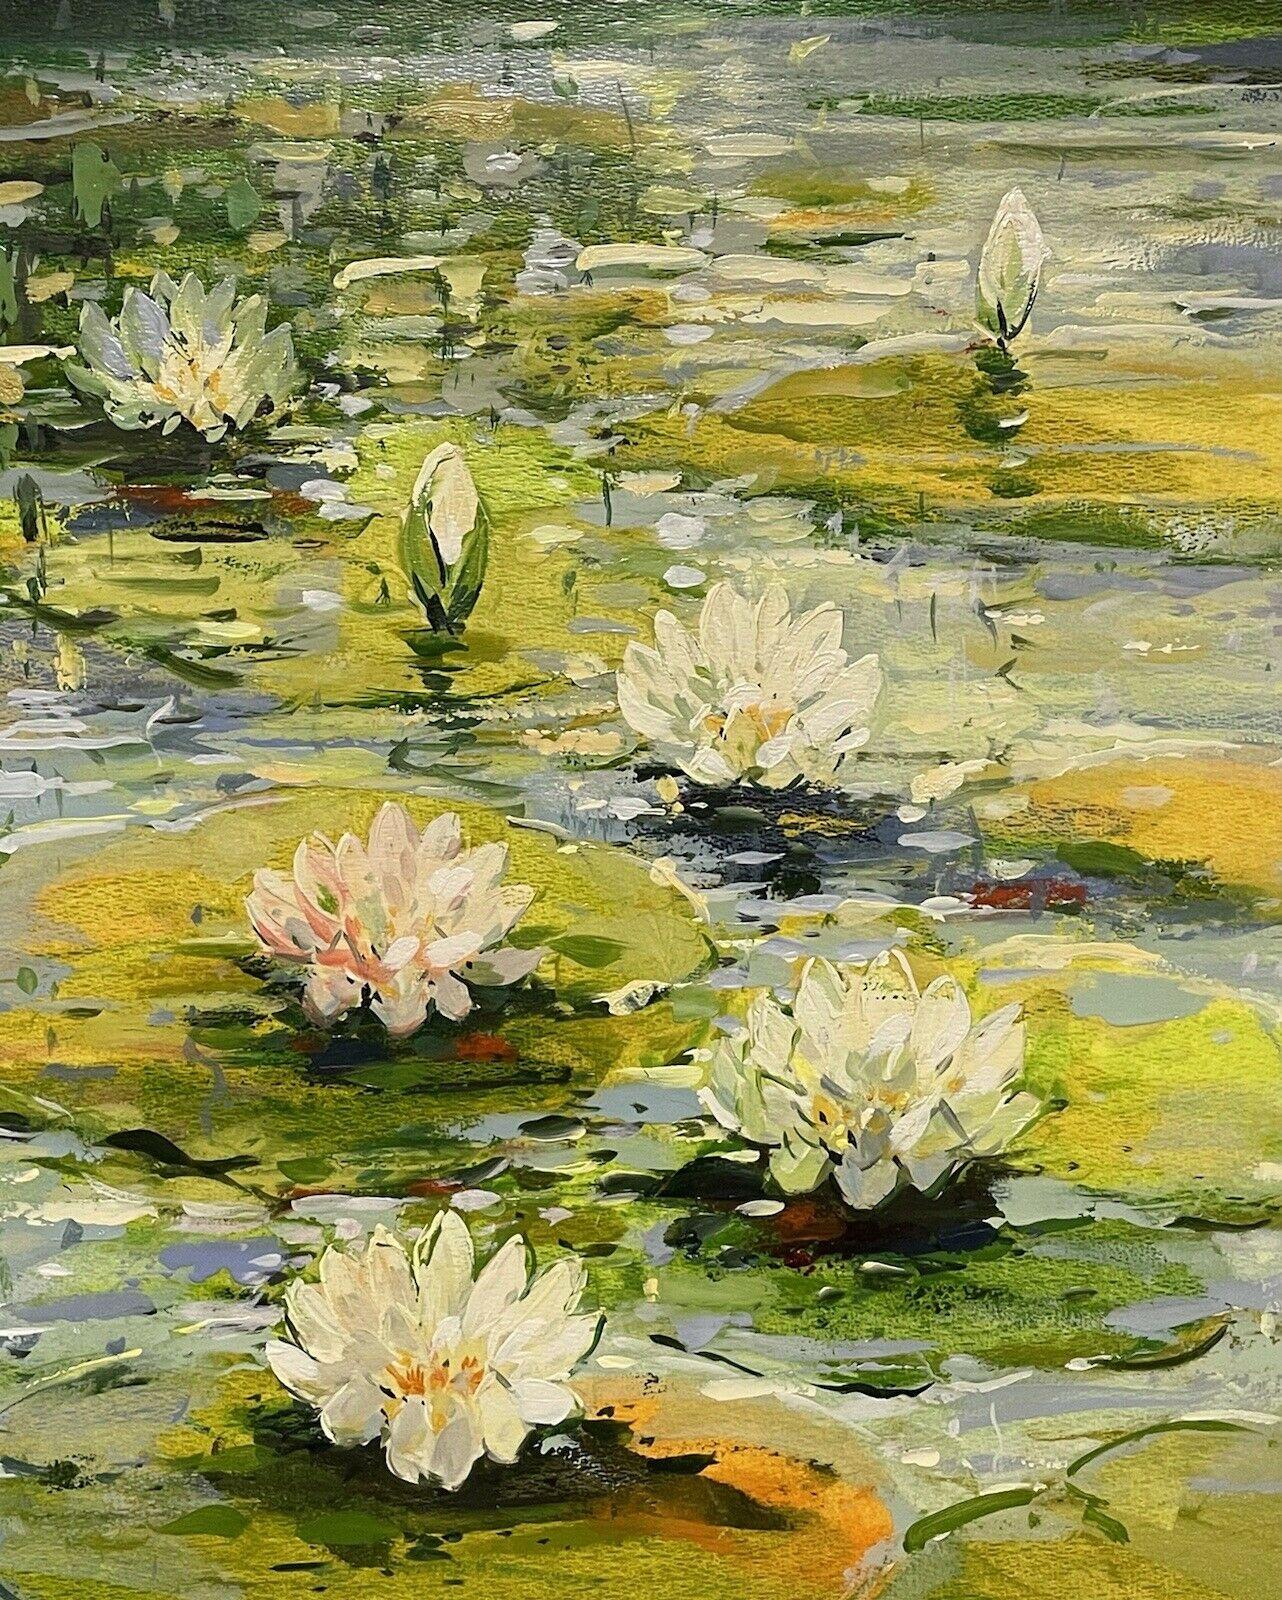 LARGE IMPRESSIONIST SIGNED PAINTING - THE WATERLILY POND - Brown Still-Life Painting by Robert de Haan